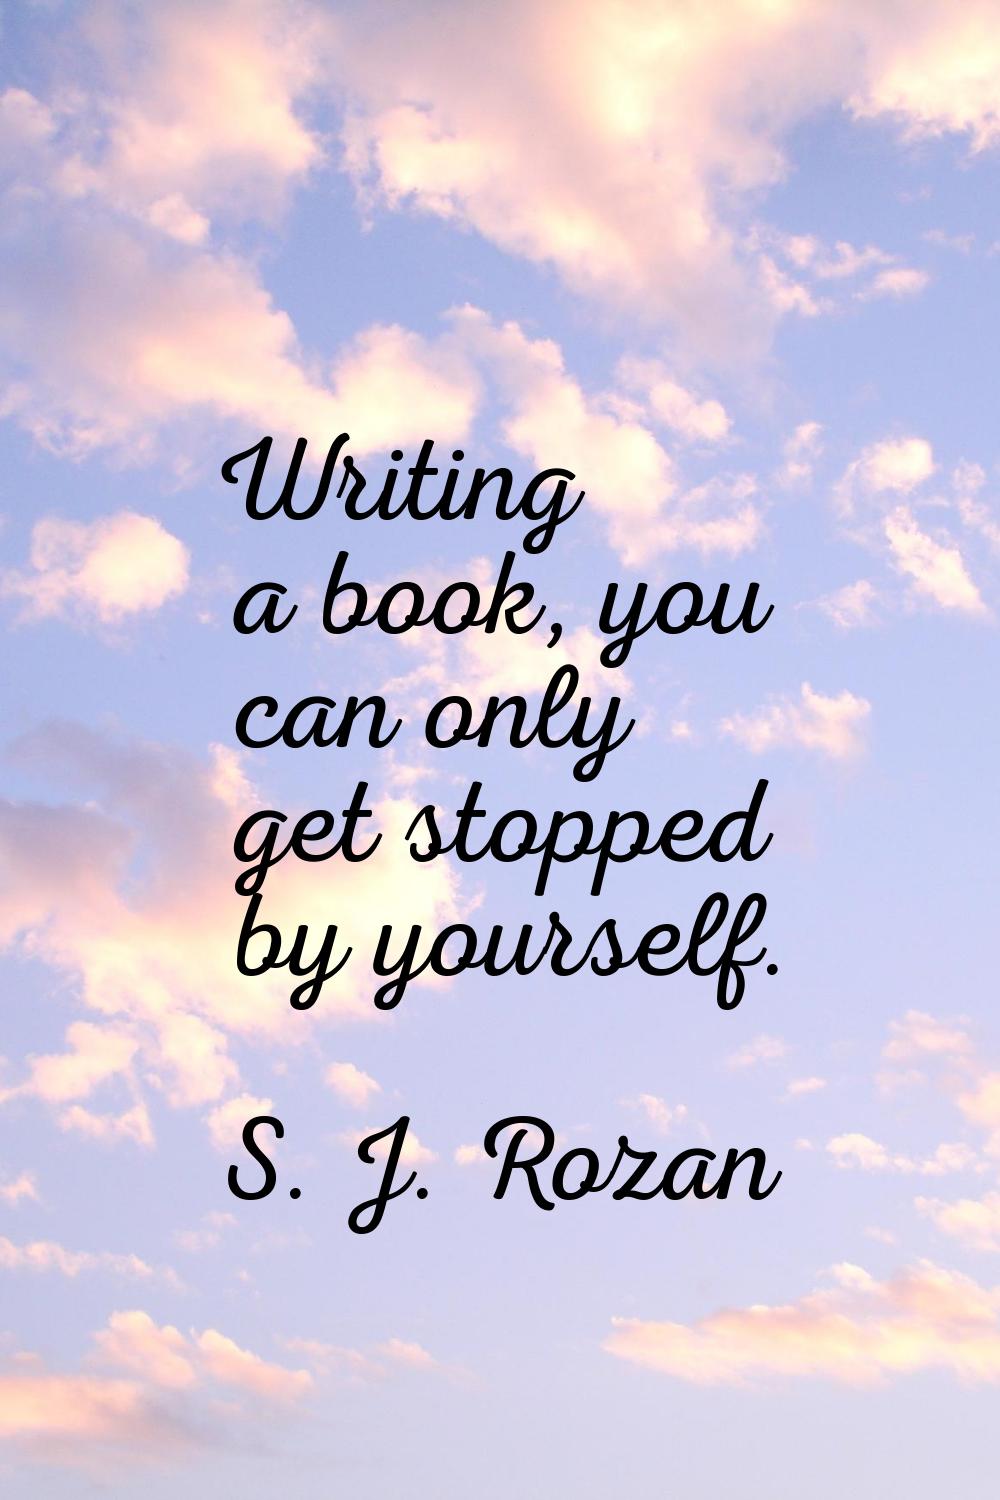 Writing a book, you can only get stopped by yourself.